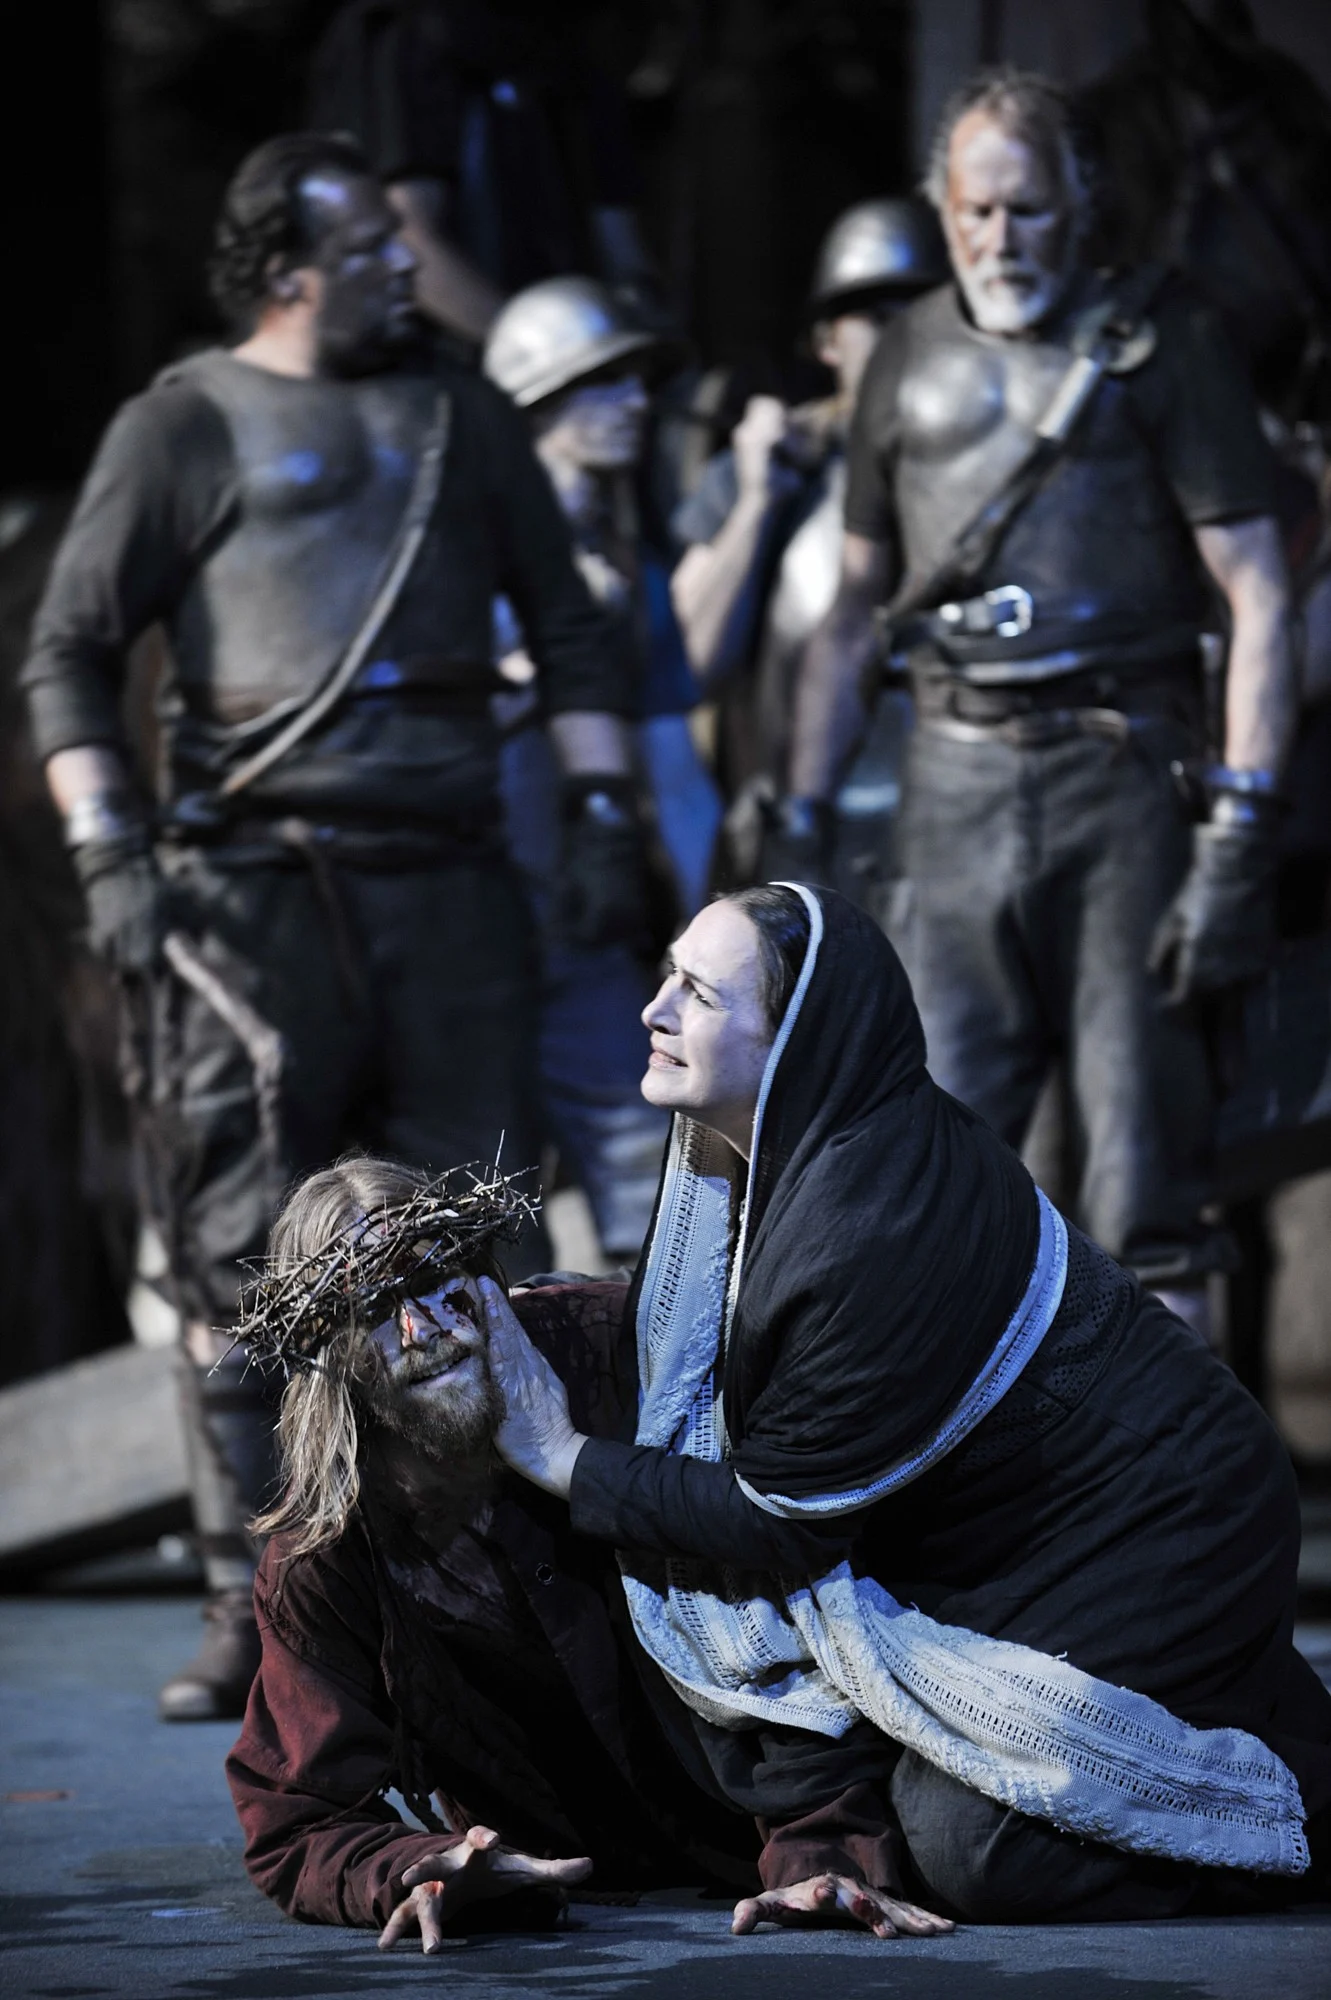 The Way of the Cross - Oberammergau Passion Play 2020 Photos: Oberammergau Passion Play 2020